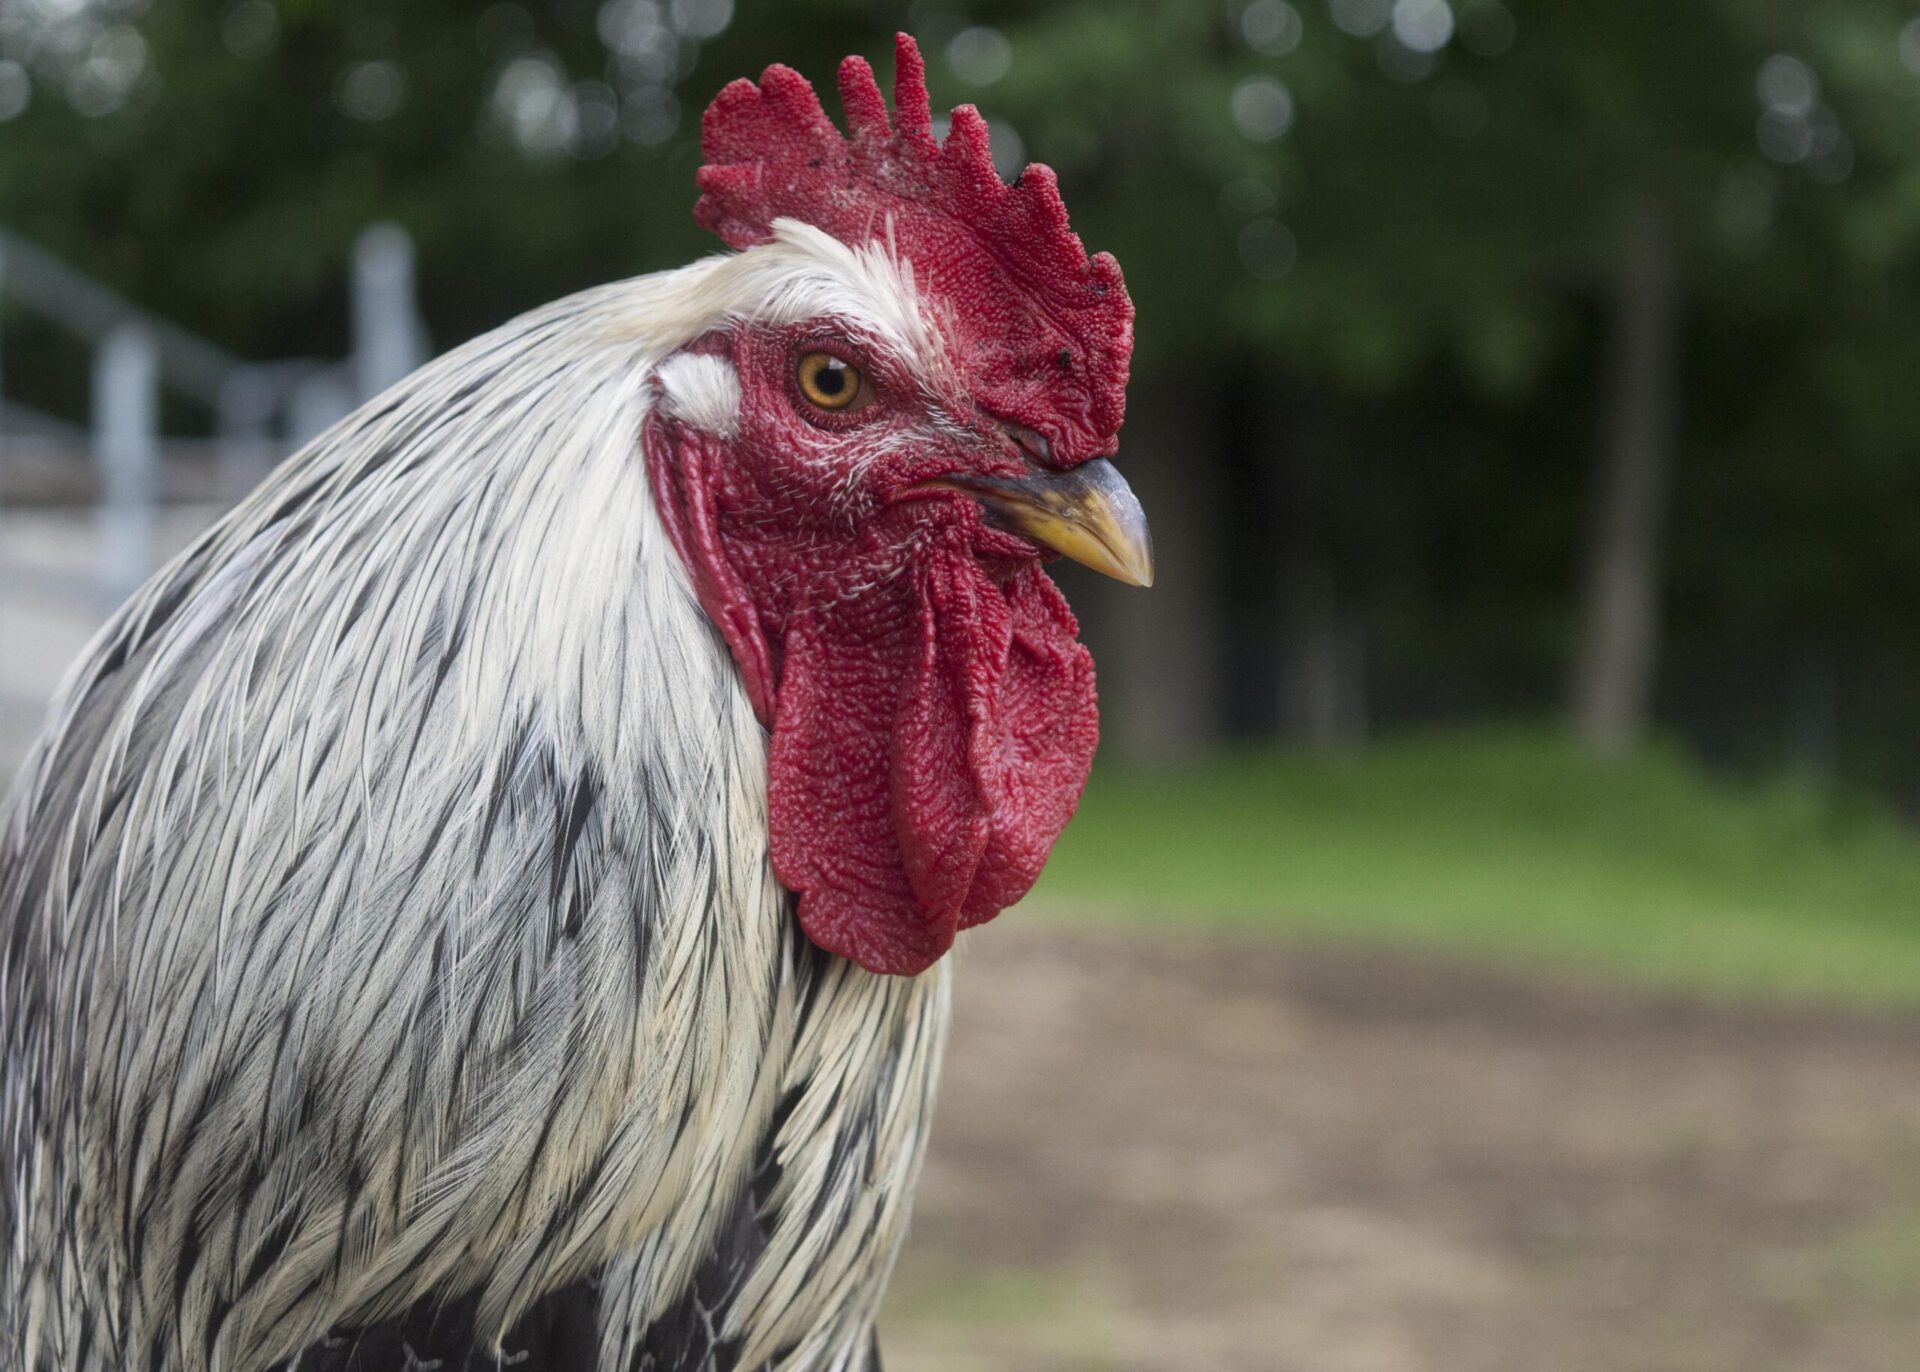 Roosters 101: The truth about rooster care and responsibility - NHSPCA